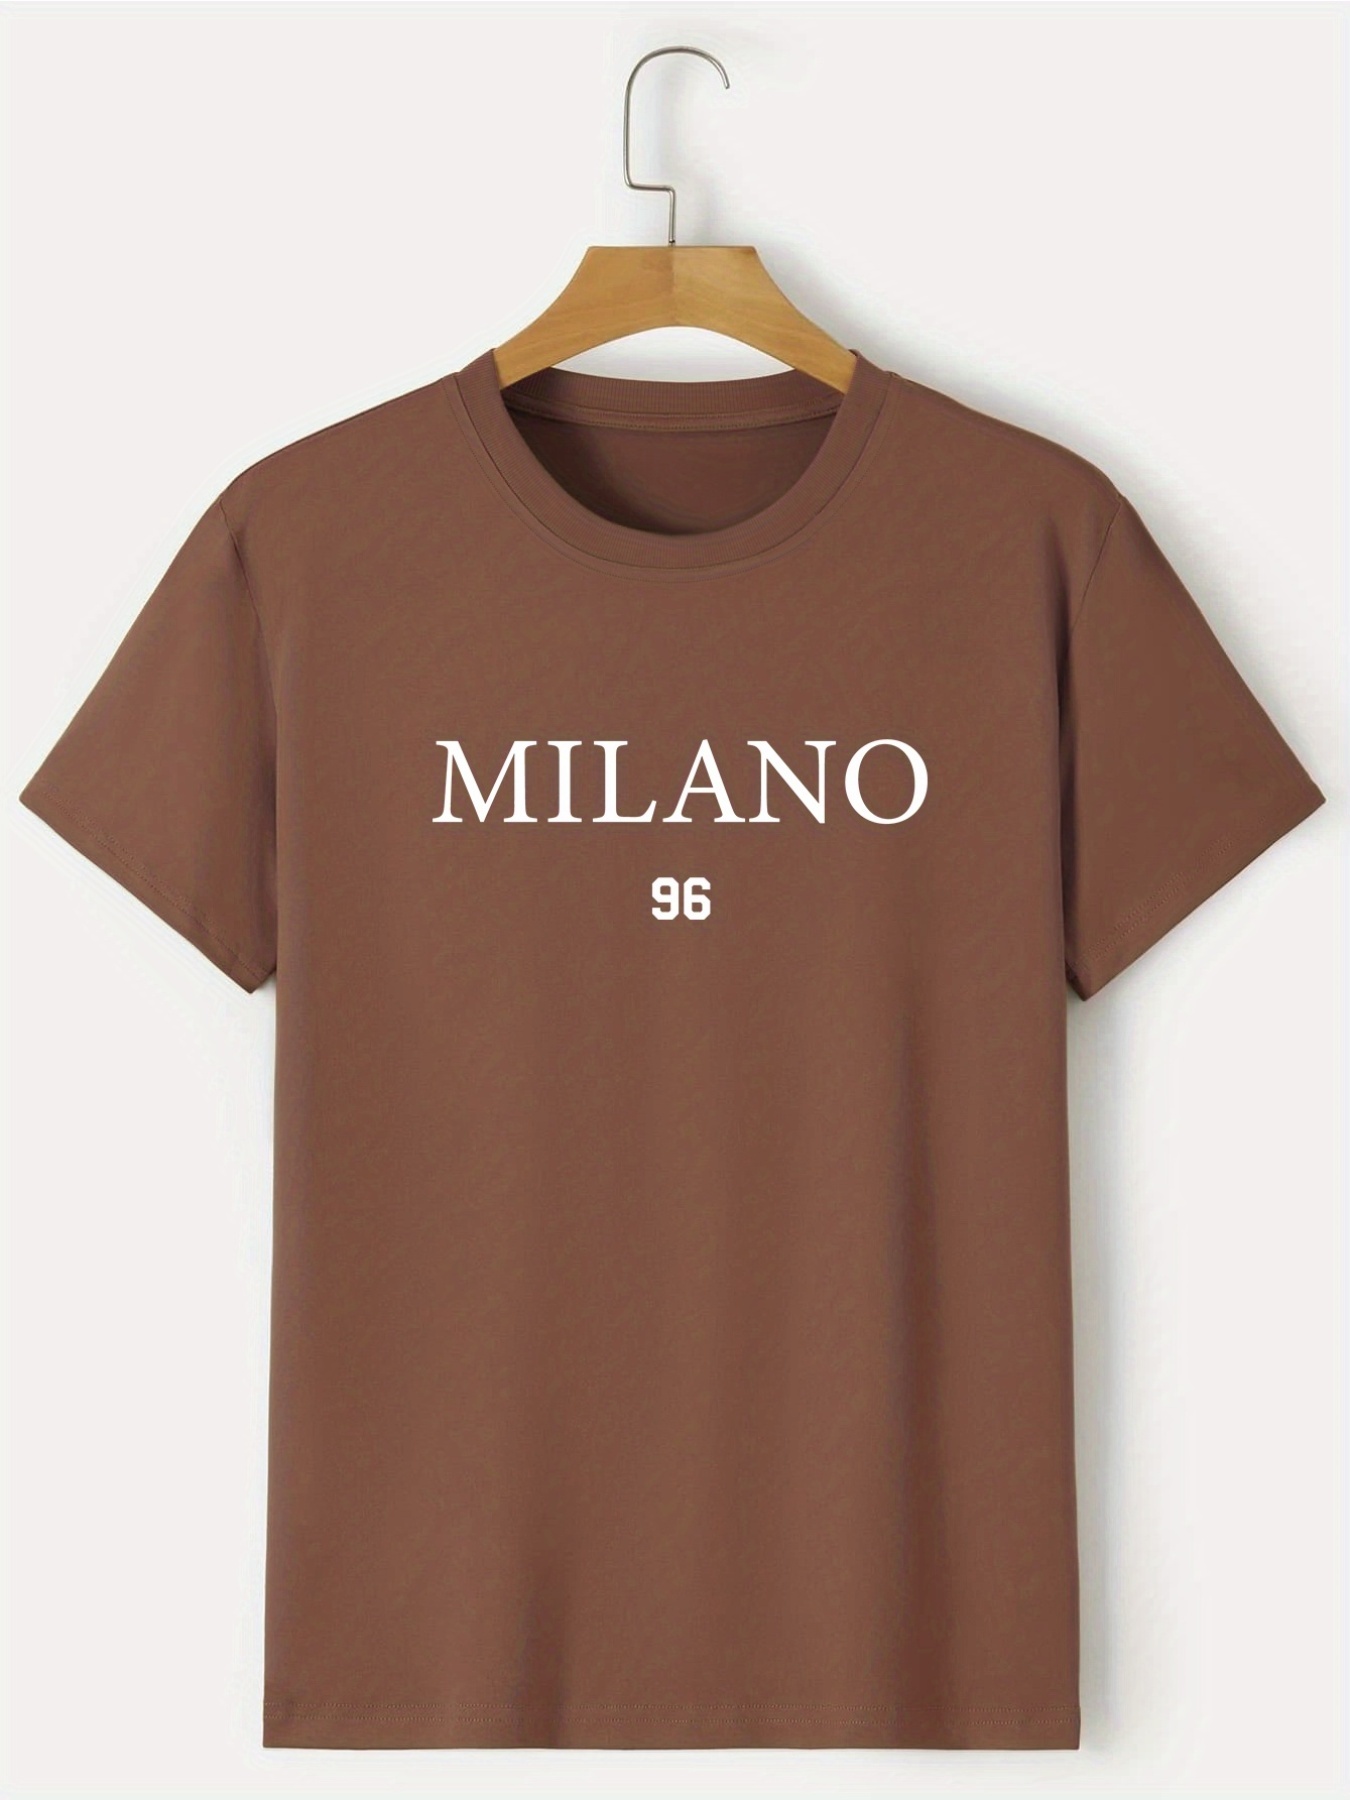 Three reasons why a short sleeve polo shirt is a summer essential – The  Fleece Milano